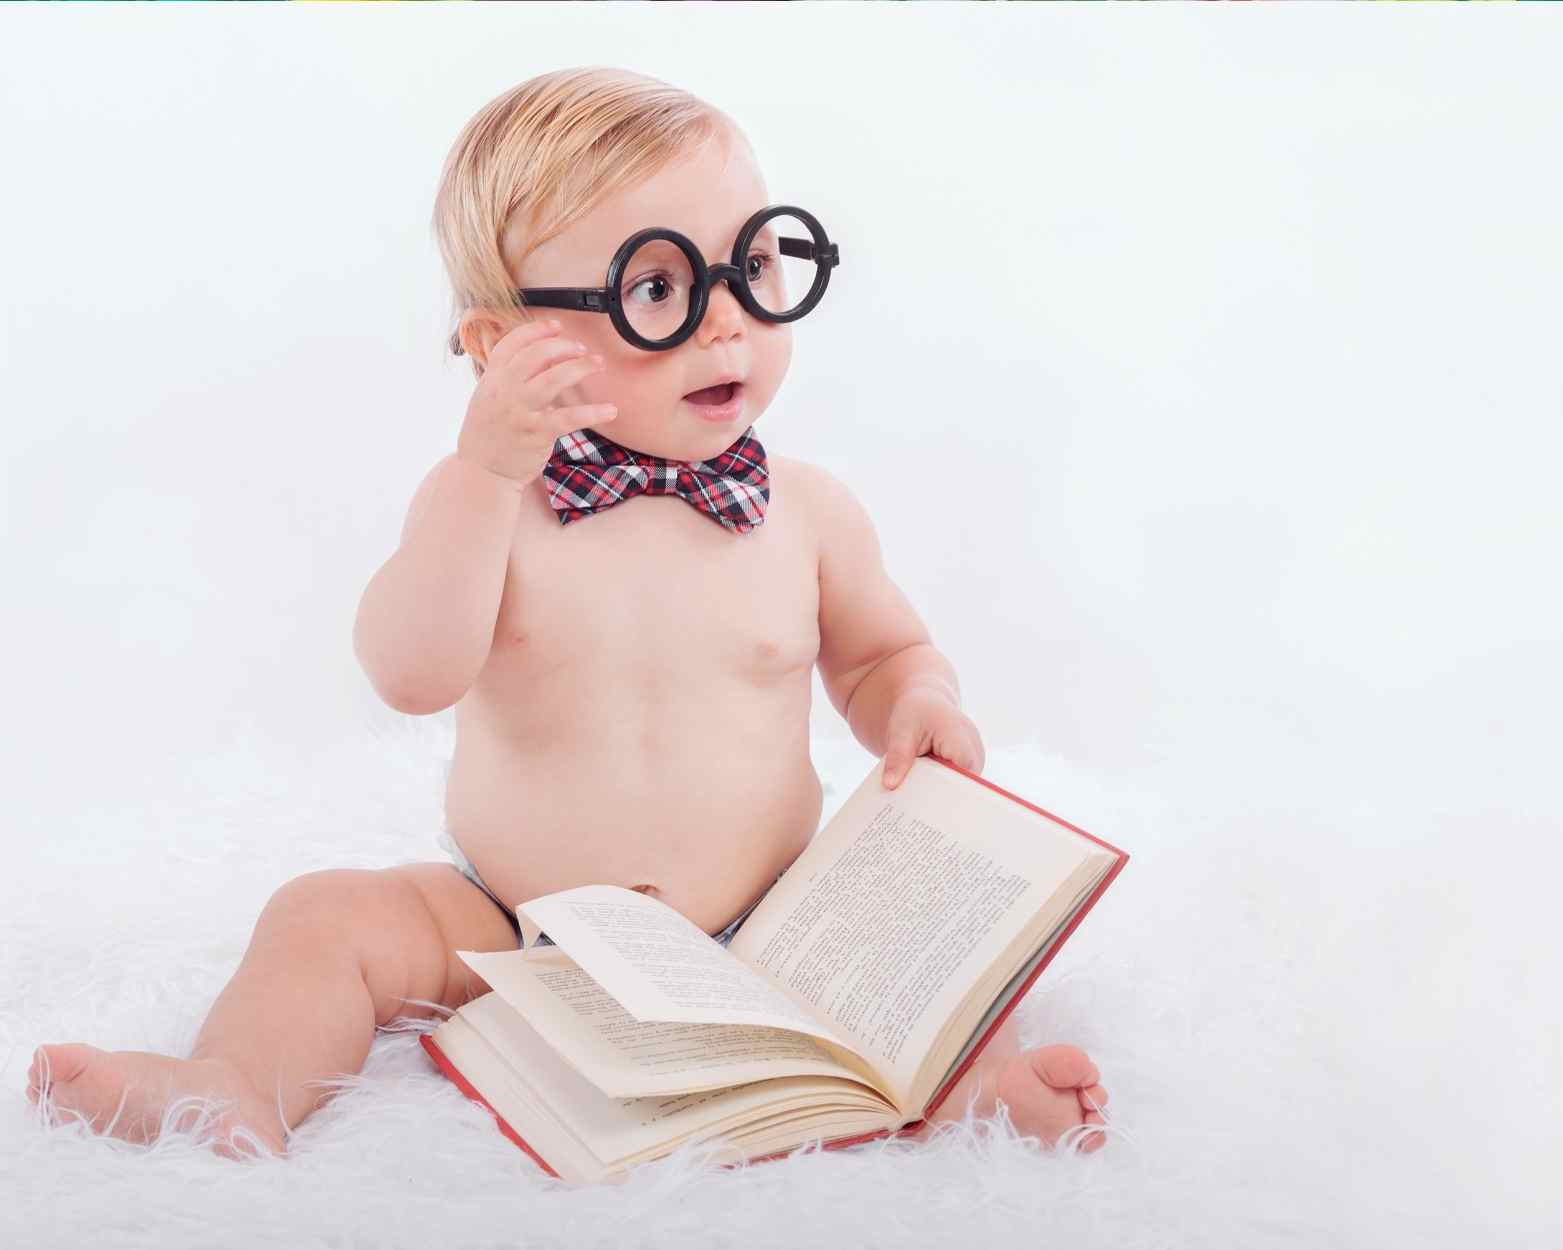 A baby boy sitting in his diaper and holding a book with fake glasses on.